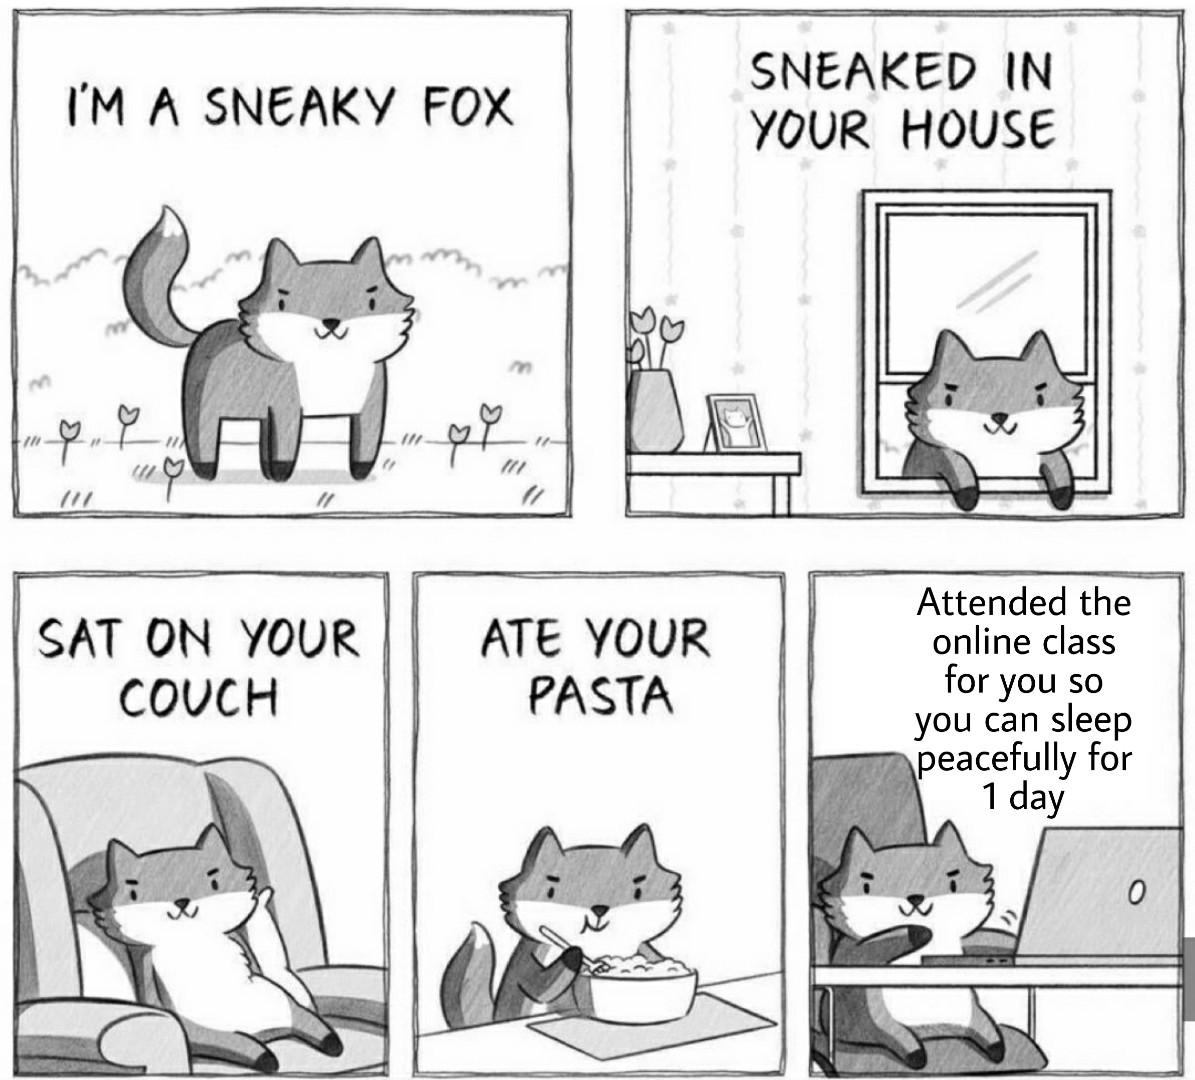 Wholesome memes,  Wholesome Memes Wholesome memes,  text: I'M A SN€AKY FOX SAT ON YOUR COVCH ATE YOUR PASTA SNEAKED IN YOUR HOUSE Attended the online class for you so you can sleep peacefully for 1 day 